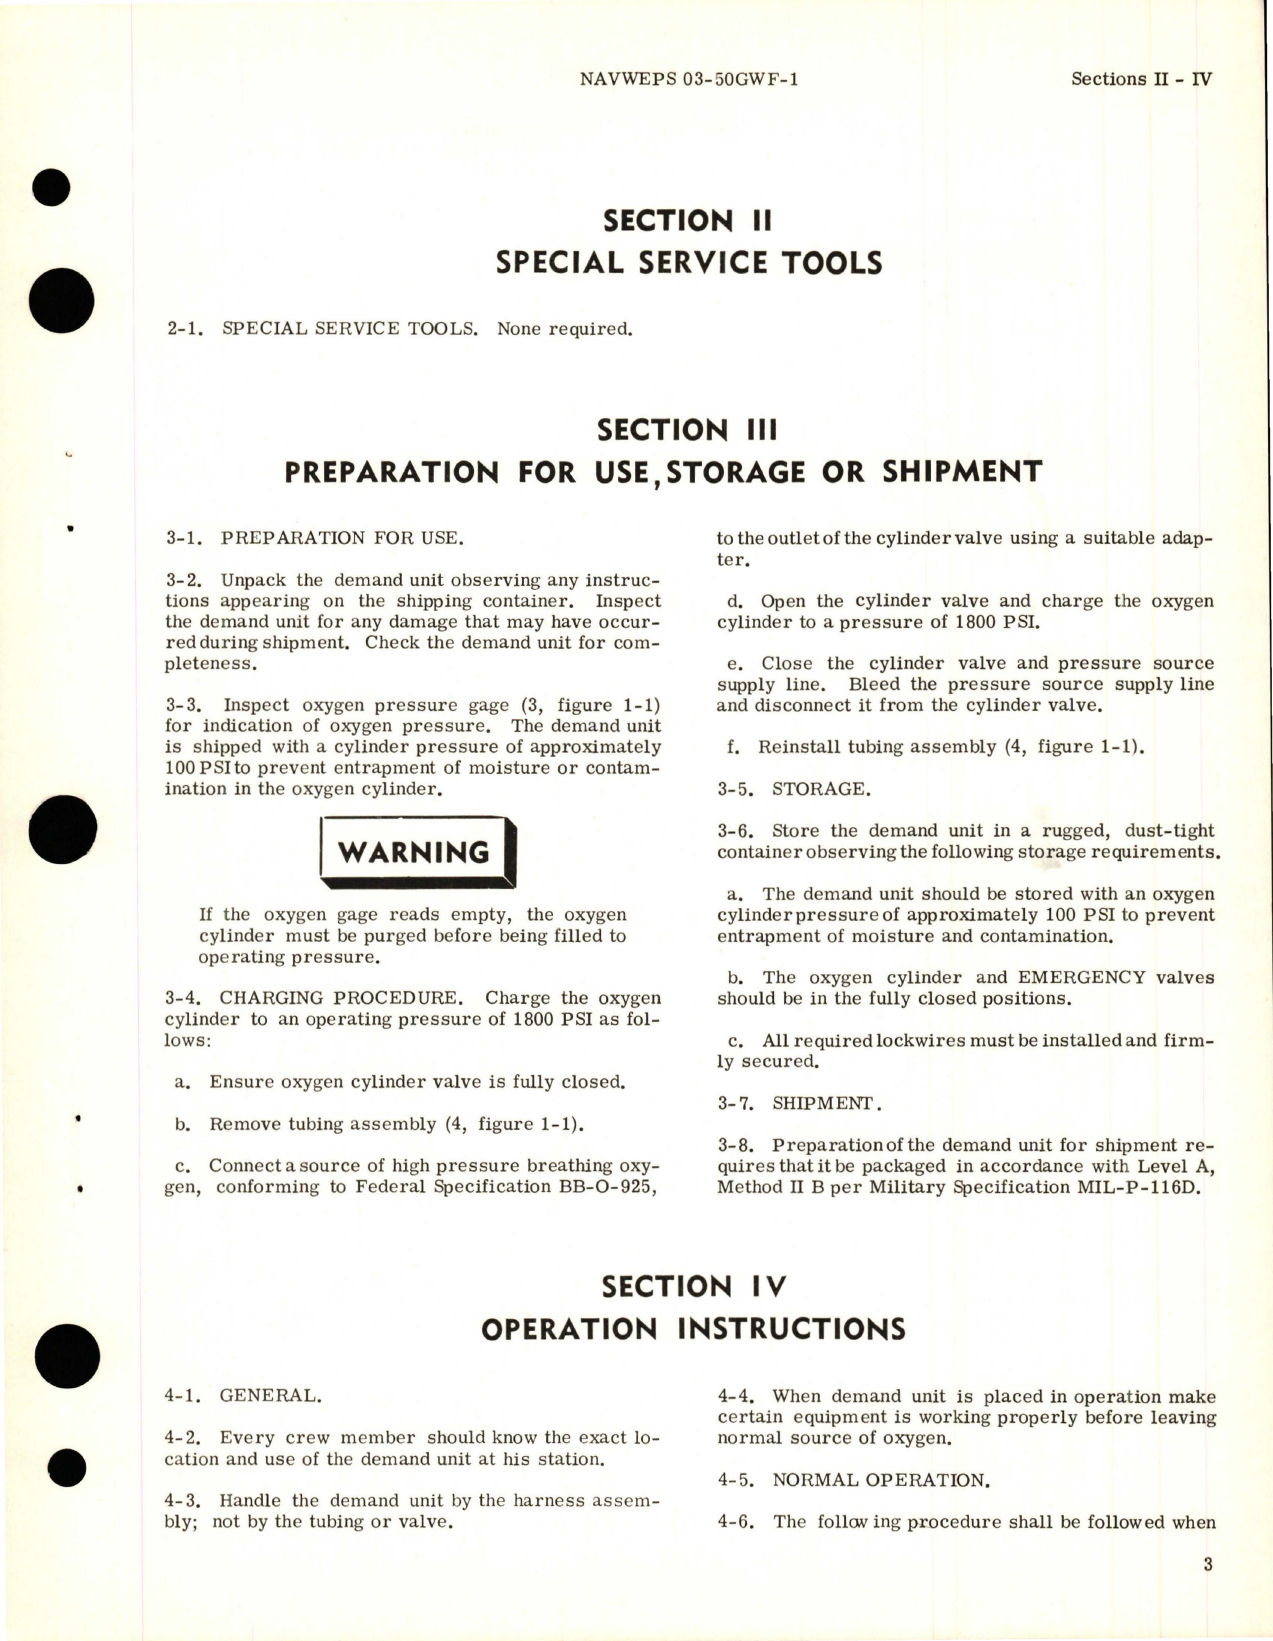 Sample page 7 from AirCorps Library document: Operation & Service Instructions with Illustrated Parts Breakdown for Individual Diluter Demand Unit - Part 15425